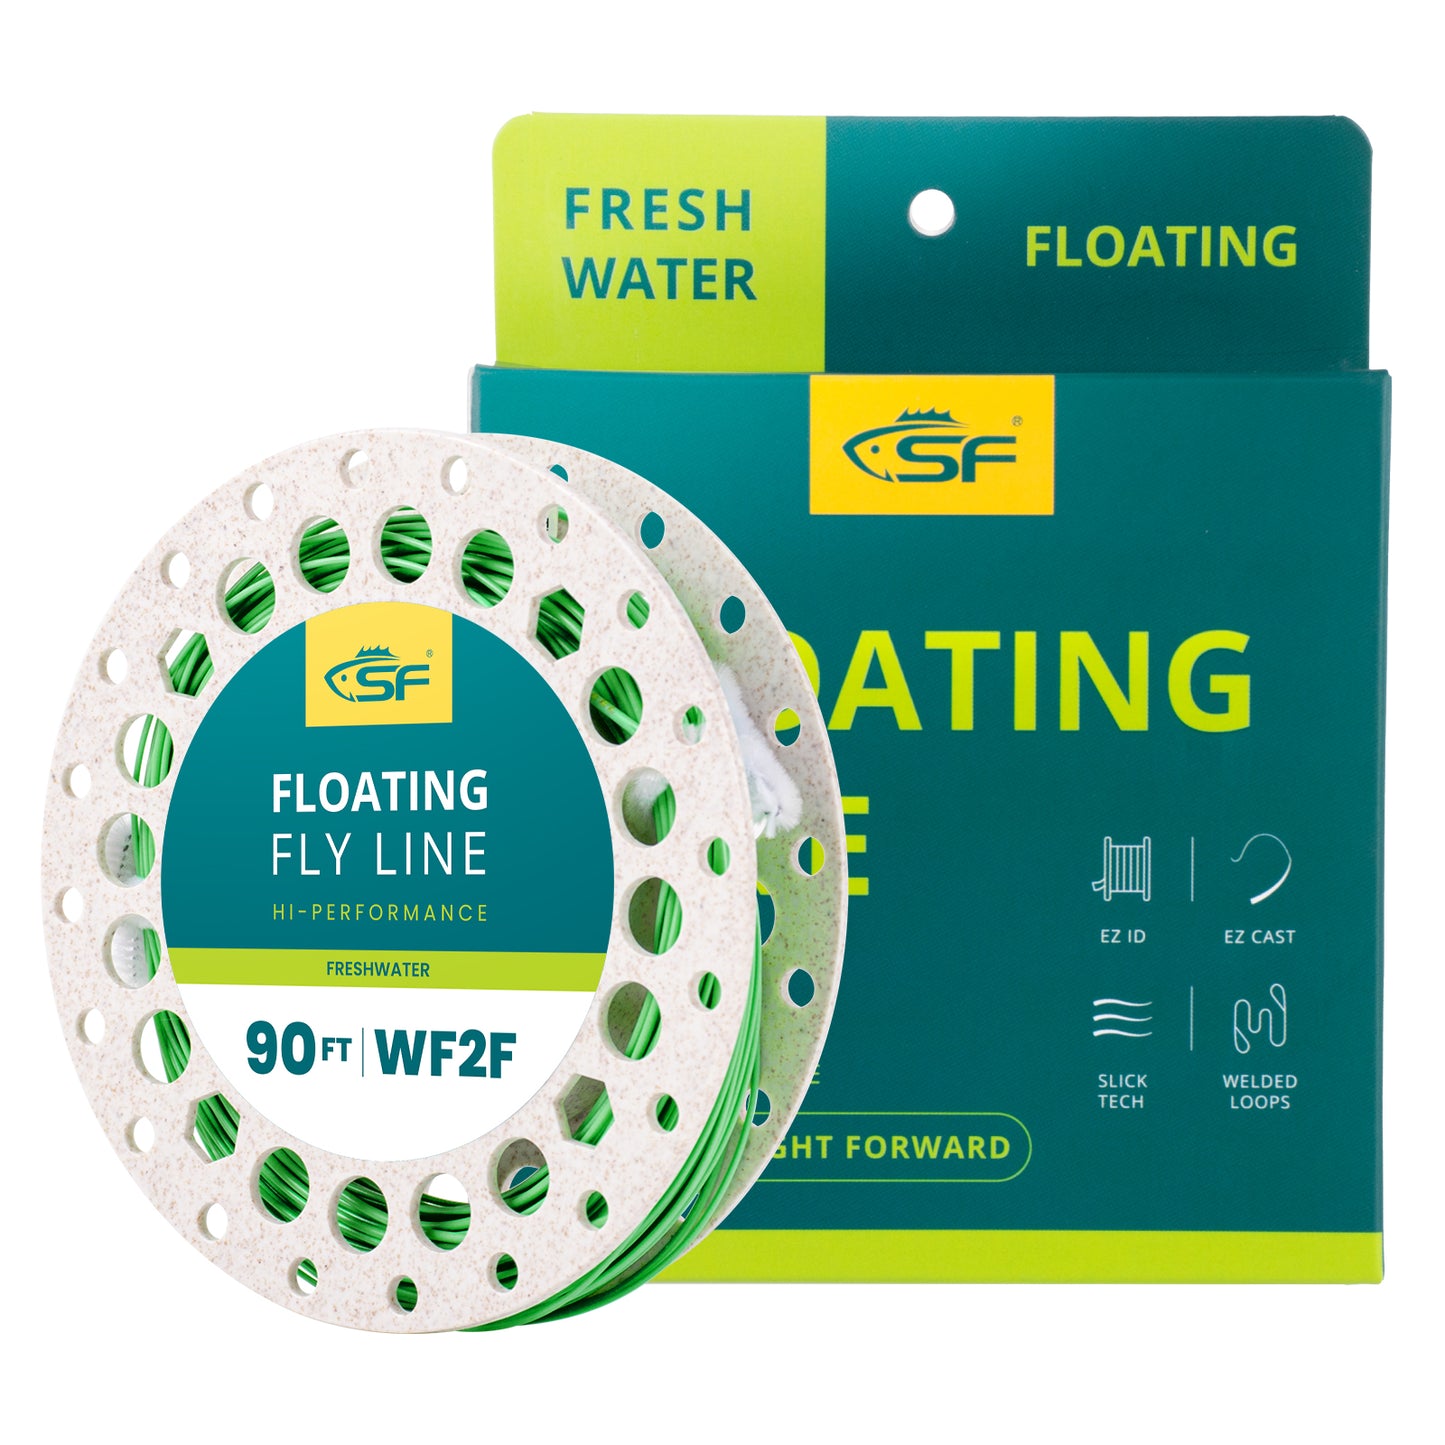 Ready To Go Fly Line Plus #8WT, Floating Flyline, 100yards 30